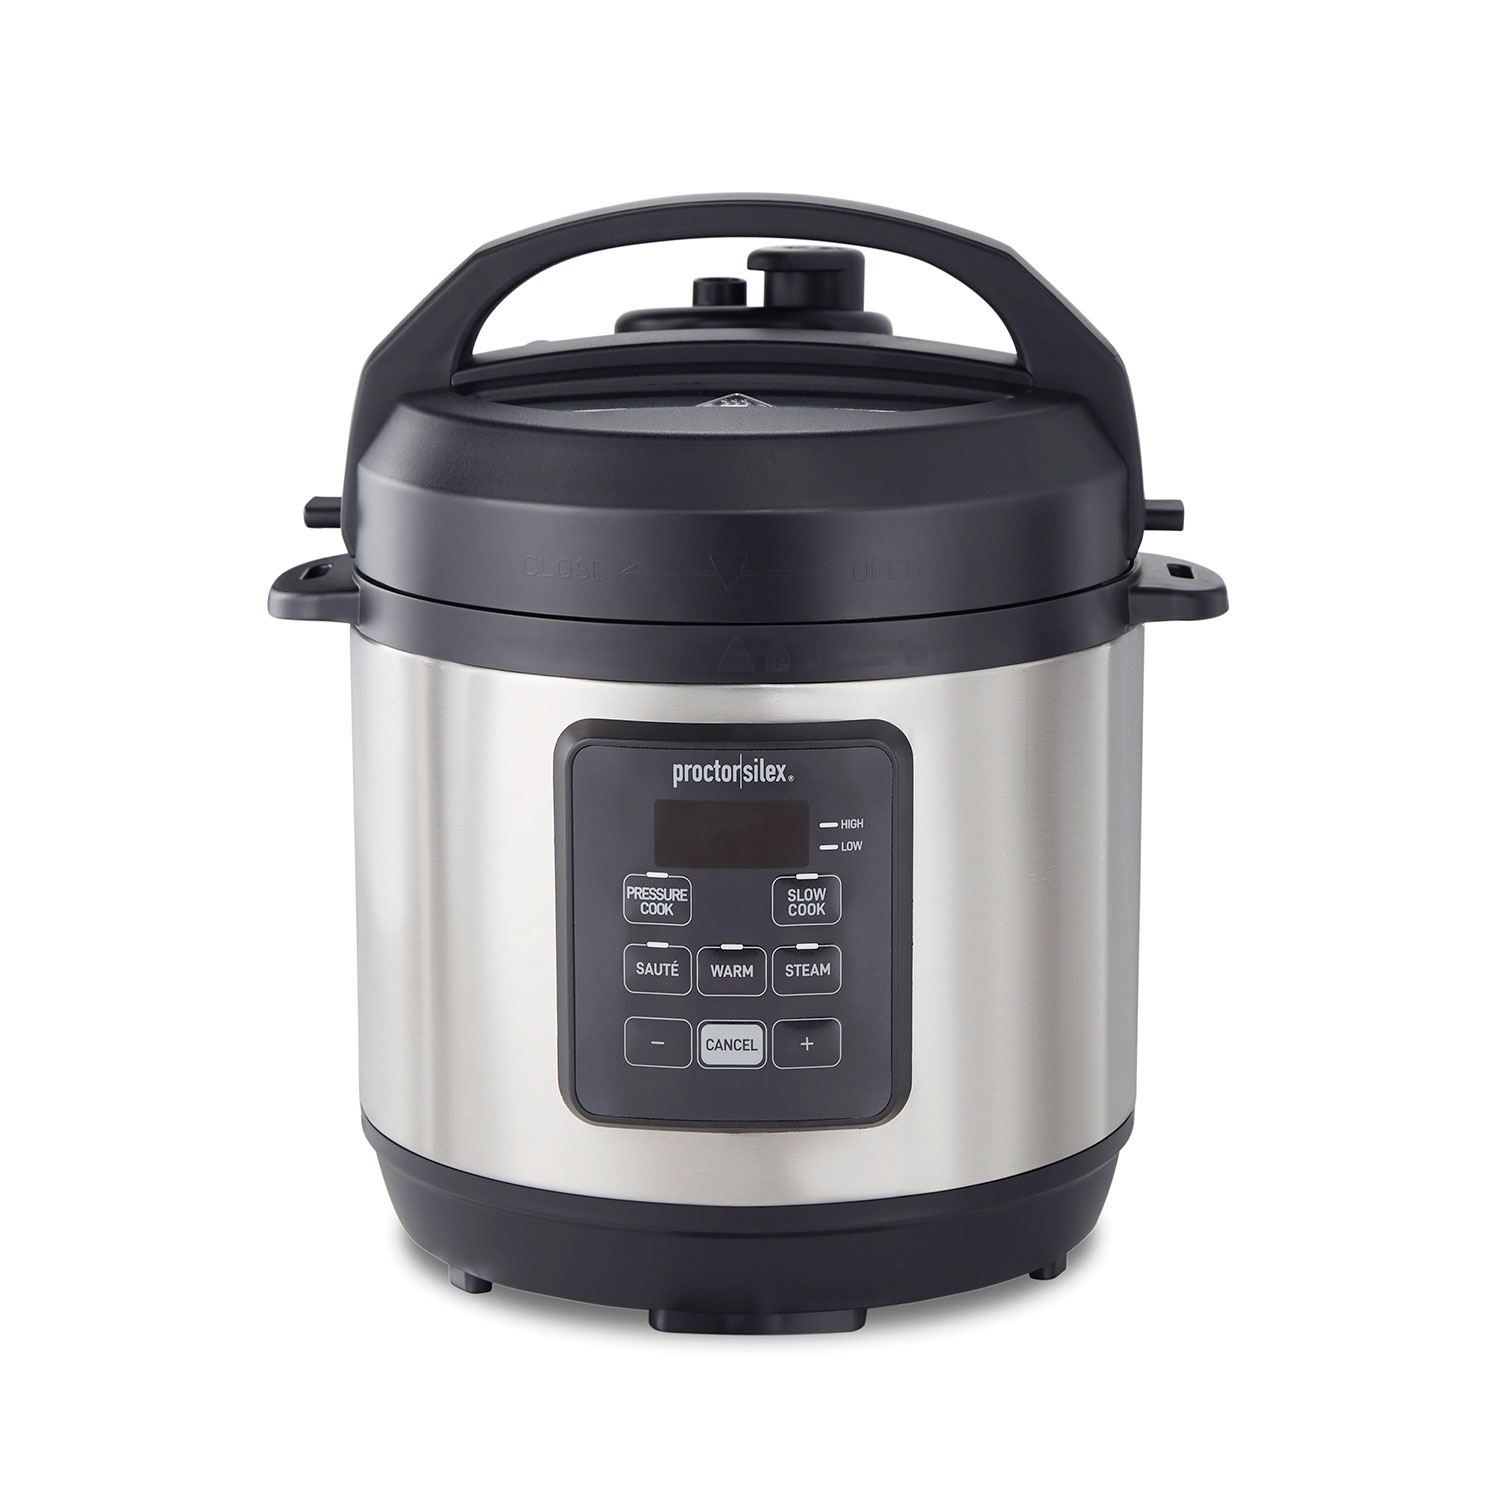 Proctor-Silex Simplicity 4-in-1 Electric Pressure Cooker, 3 Quart Multi-function with Slow Cook, Steam, Sauté, Rice, Stainless Steel (34503)